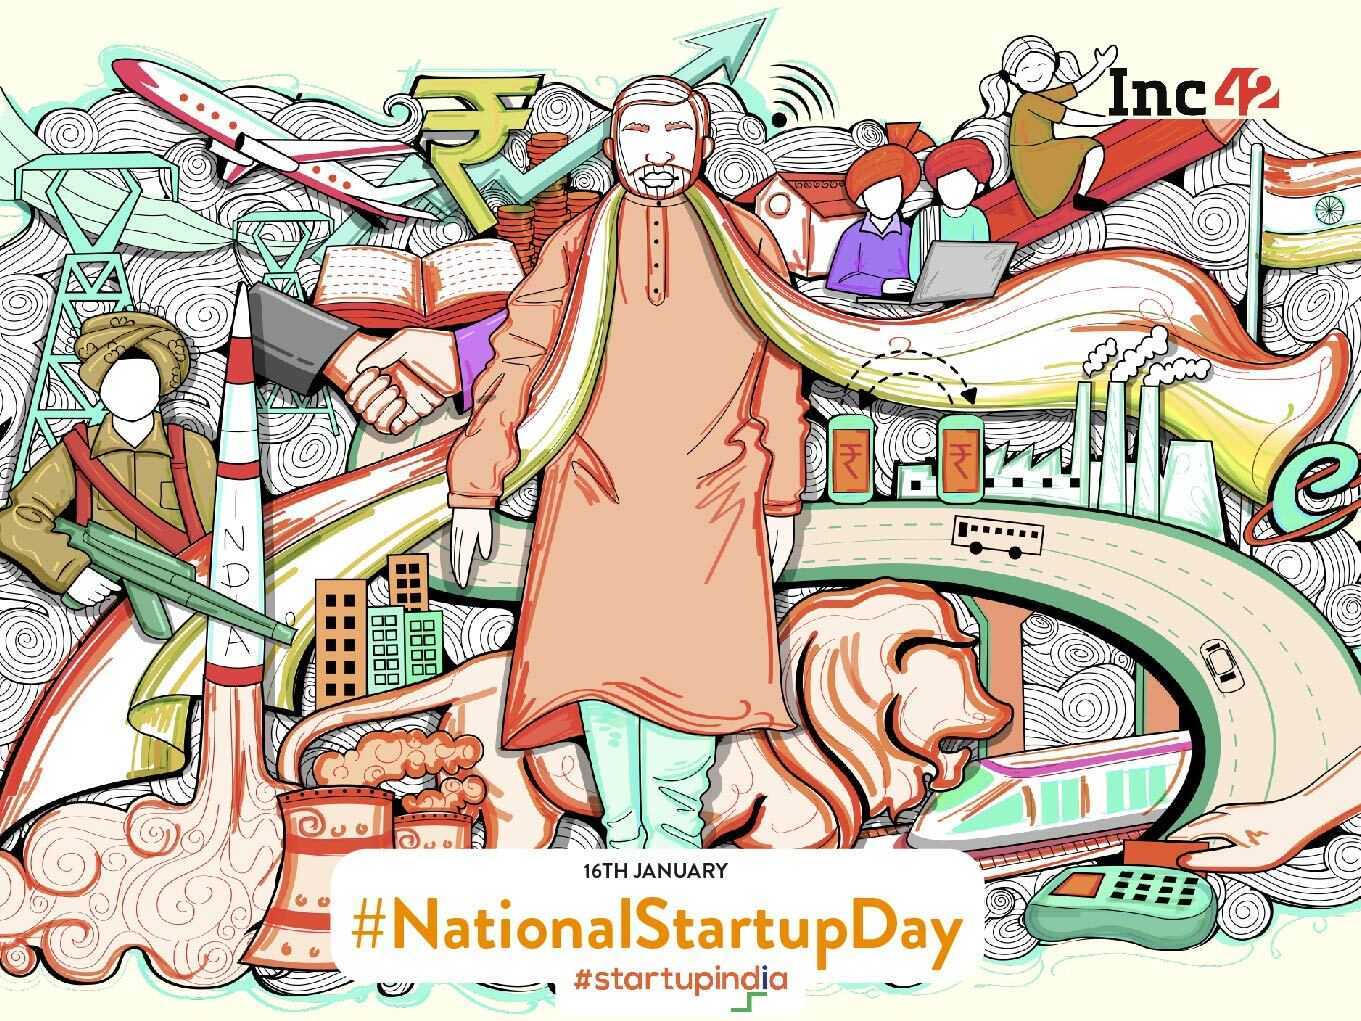 India's First National Startup Day! A Milestone For Indian Startups